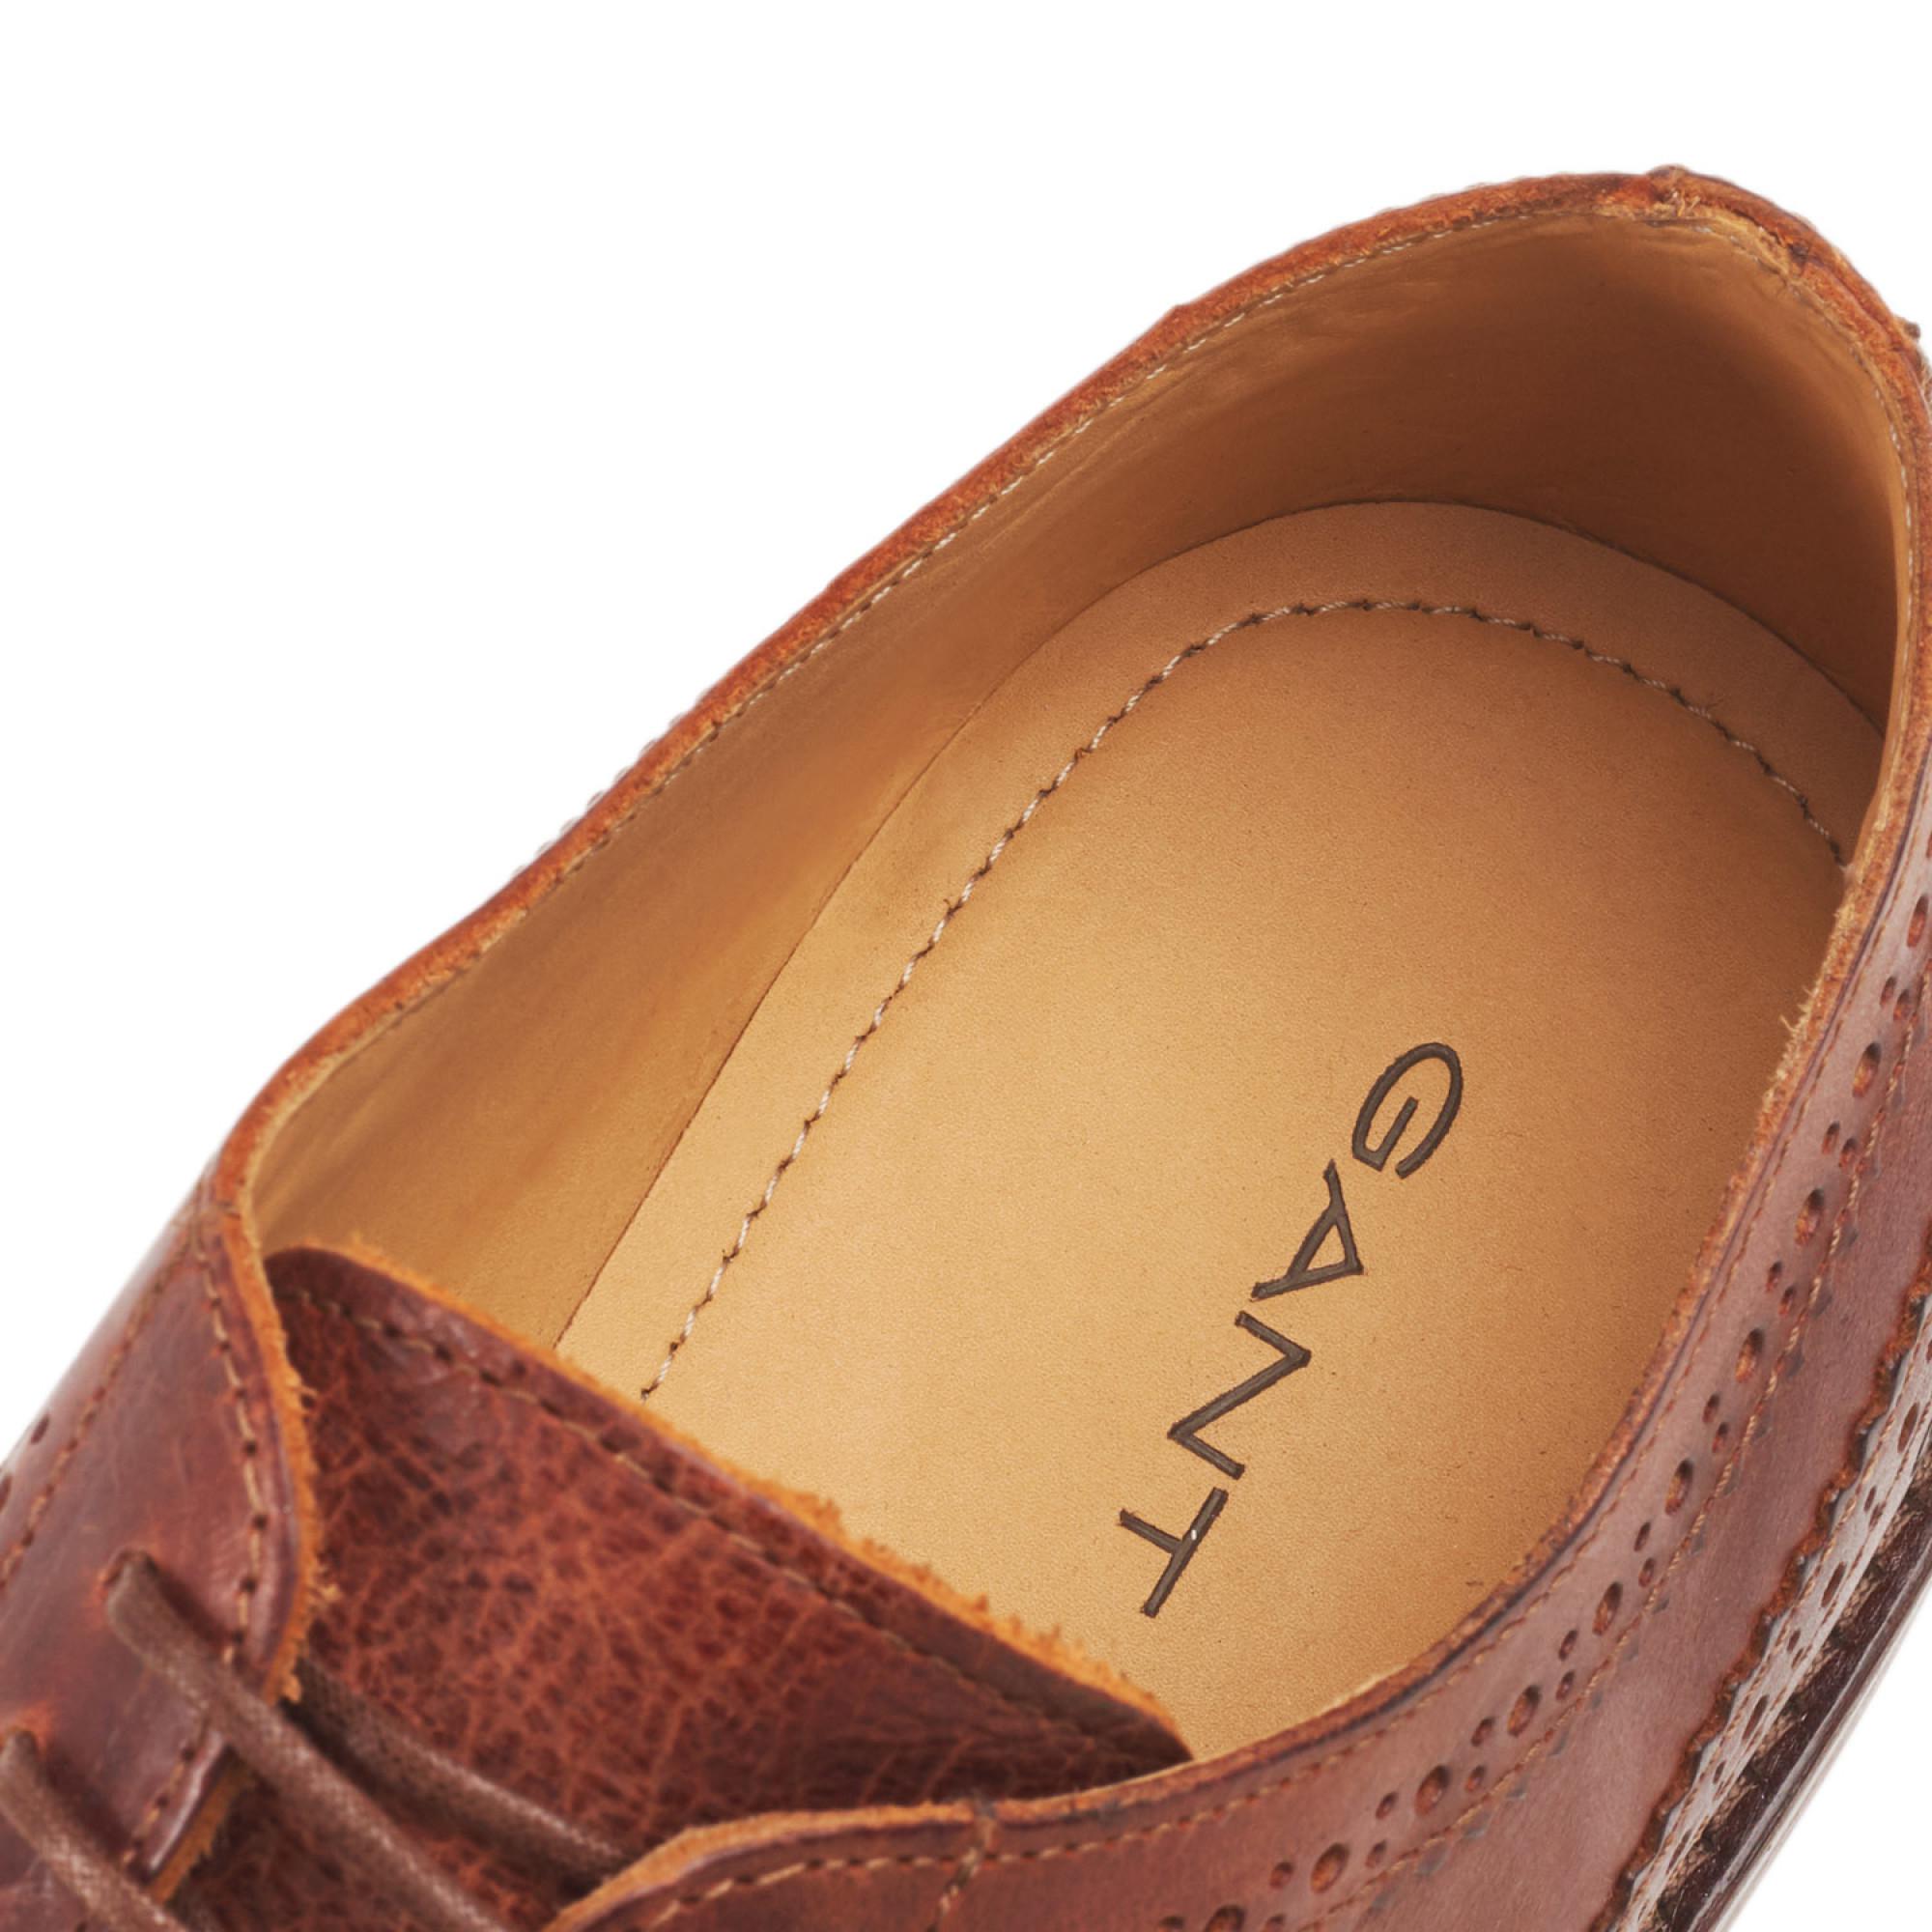 GANT Leather Ricardo Derby Shoes in Brown for Men - Lyst